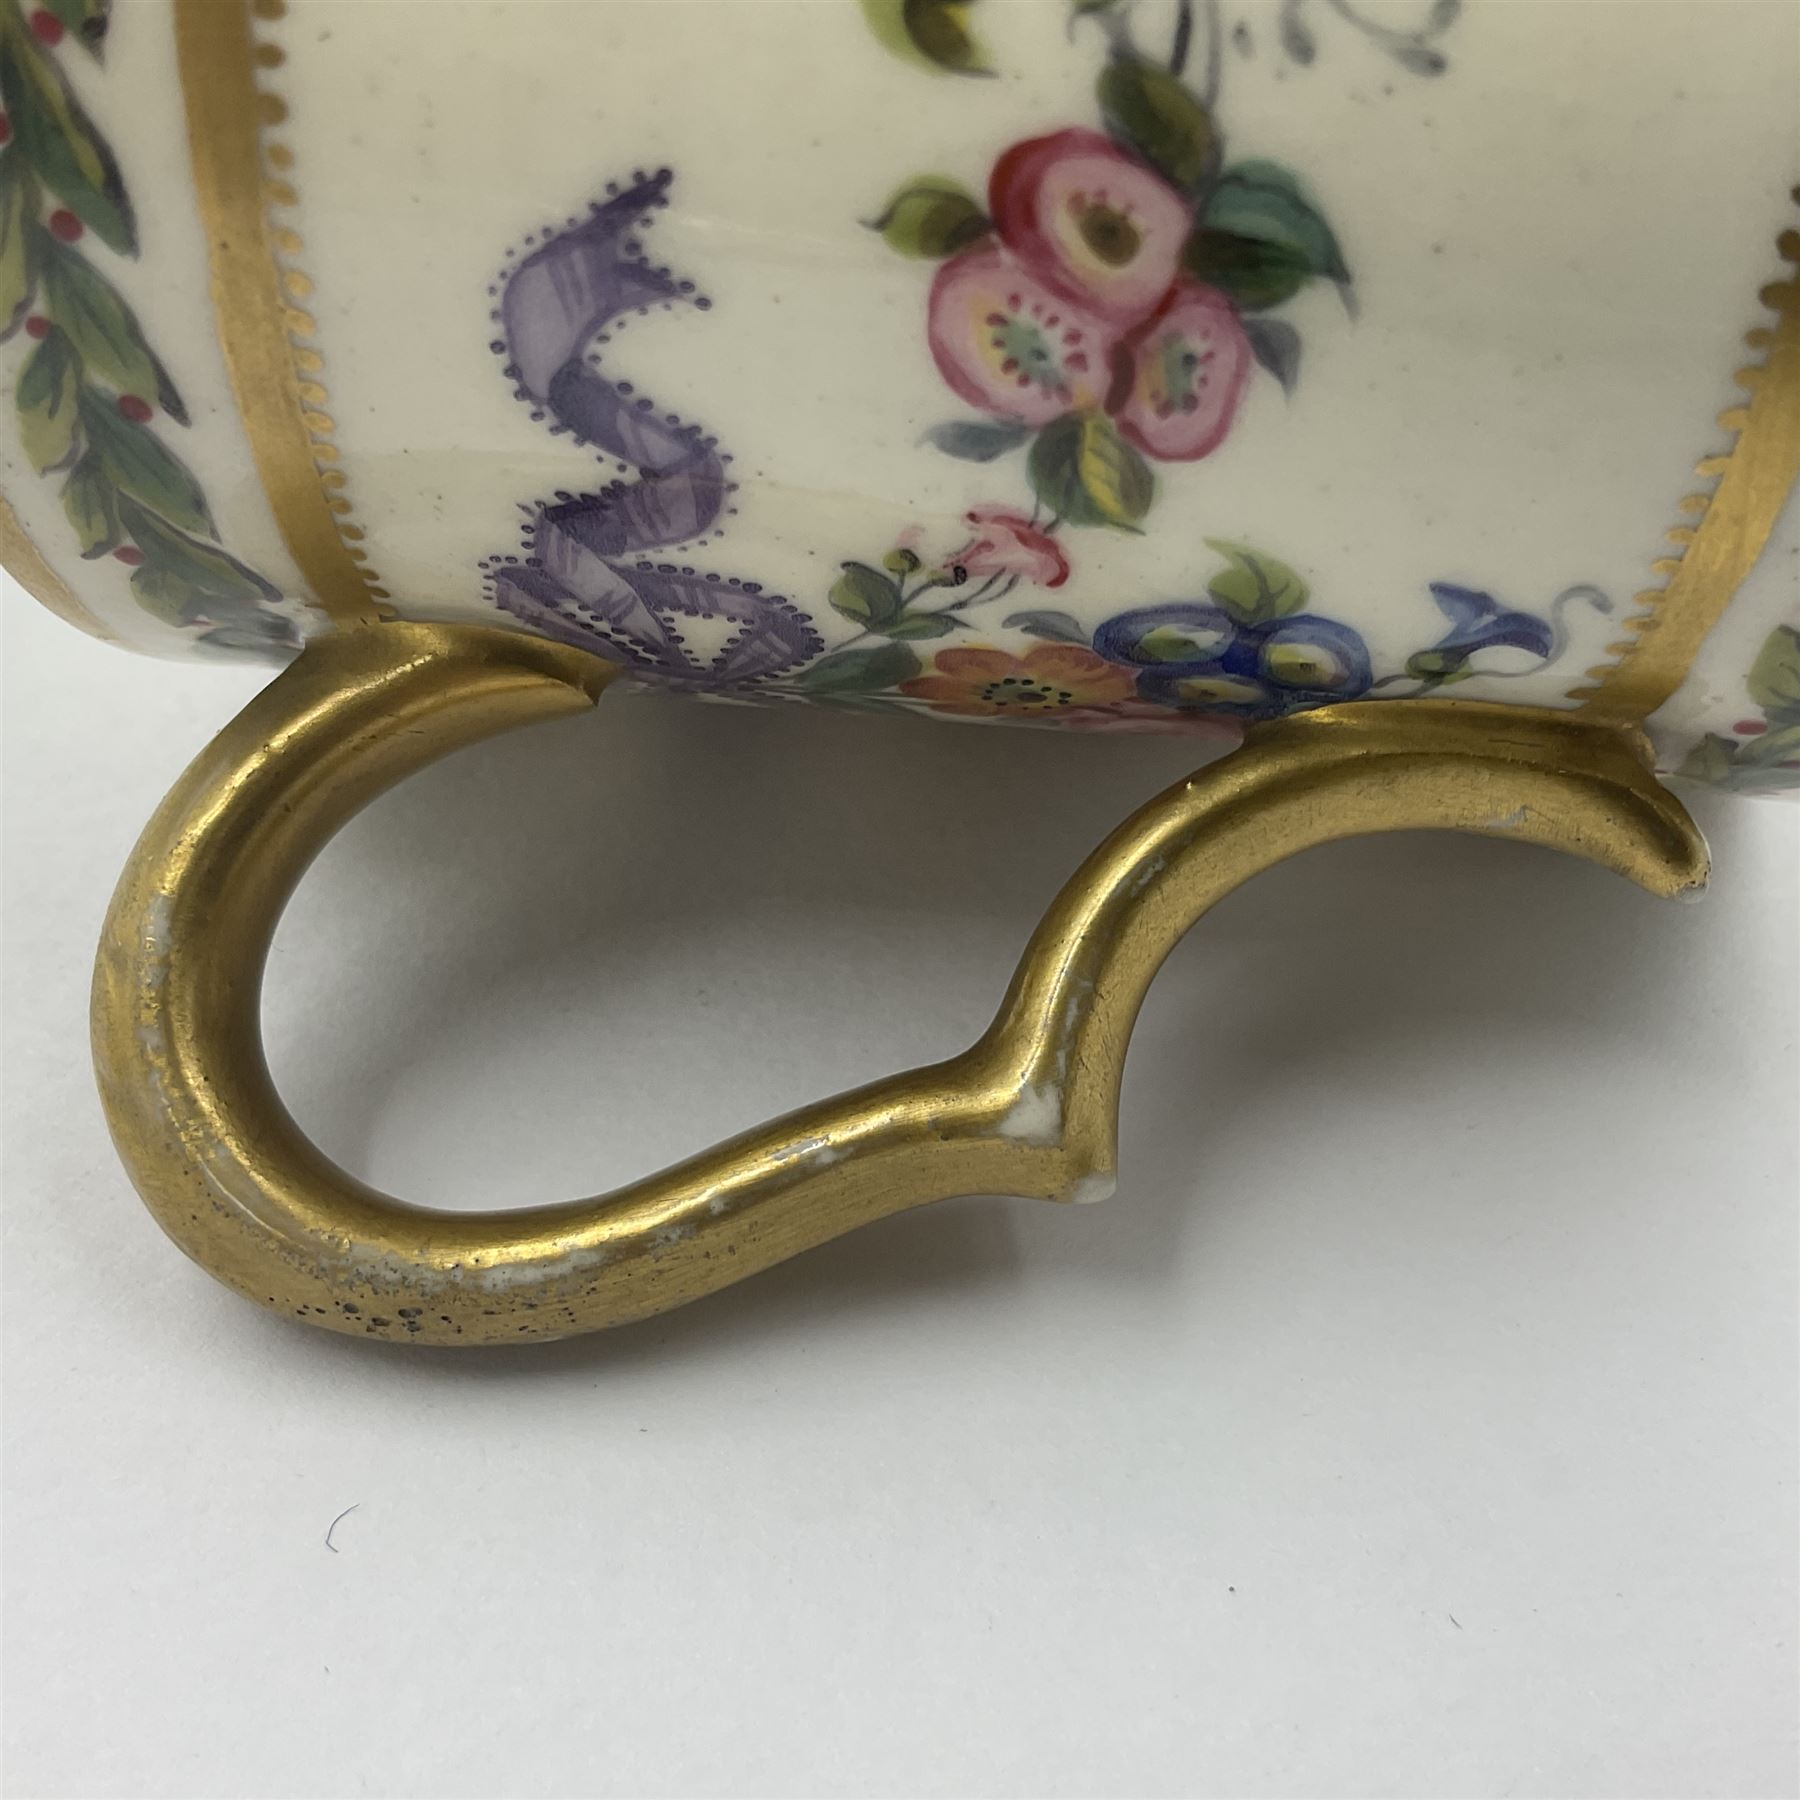 Sevres soft paste porcelain coffee can and saucer with date code for 1780 - Image 14 of 18